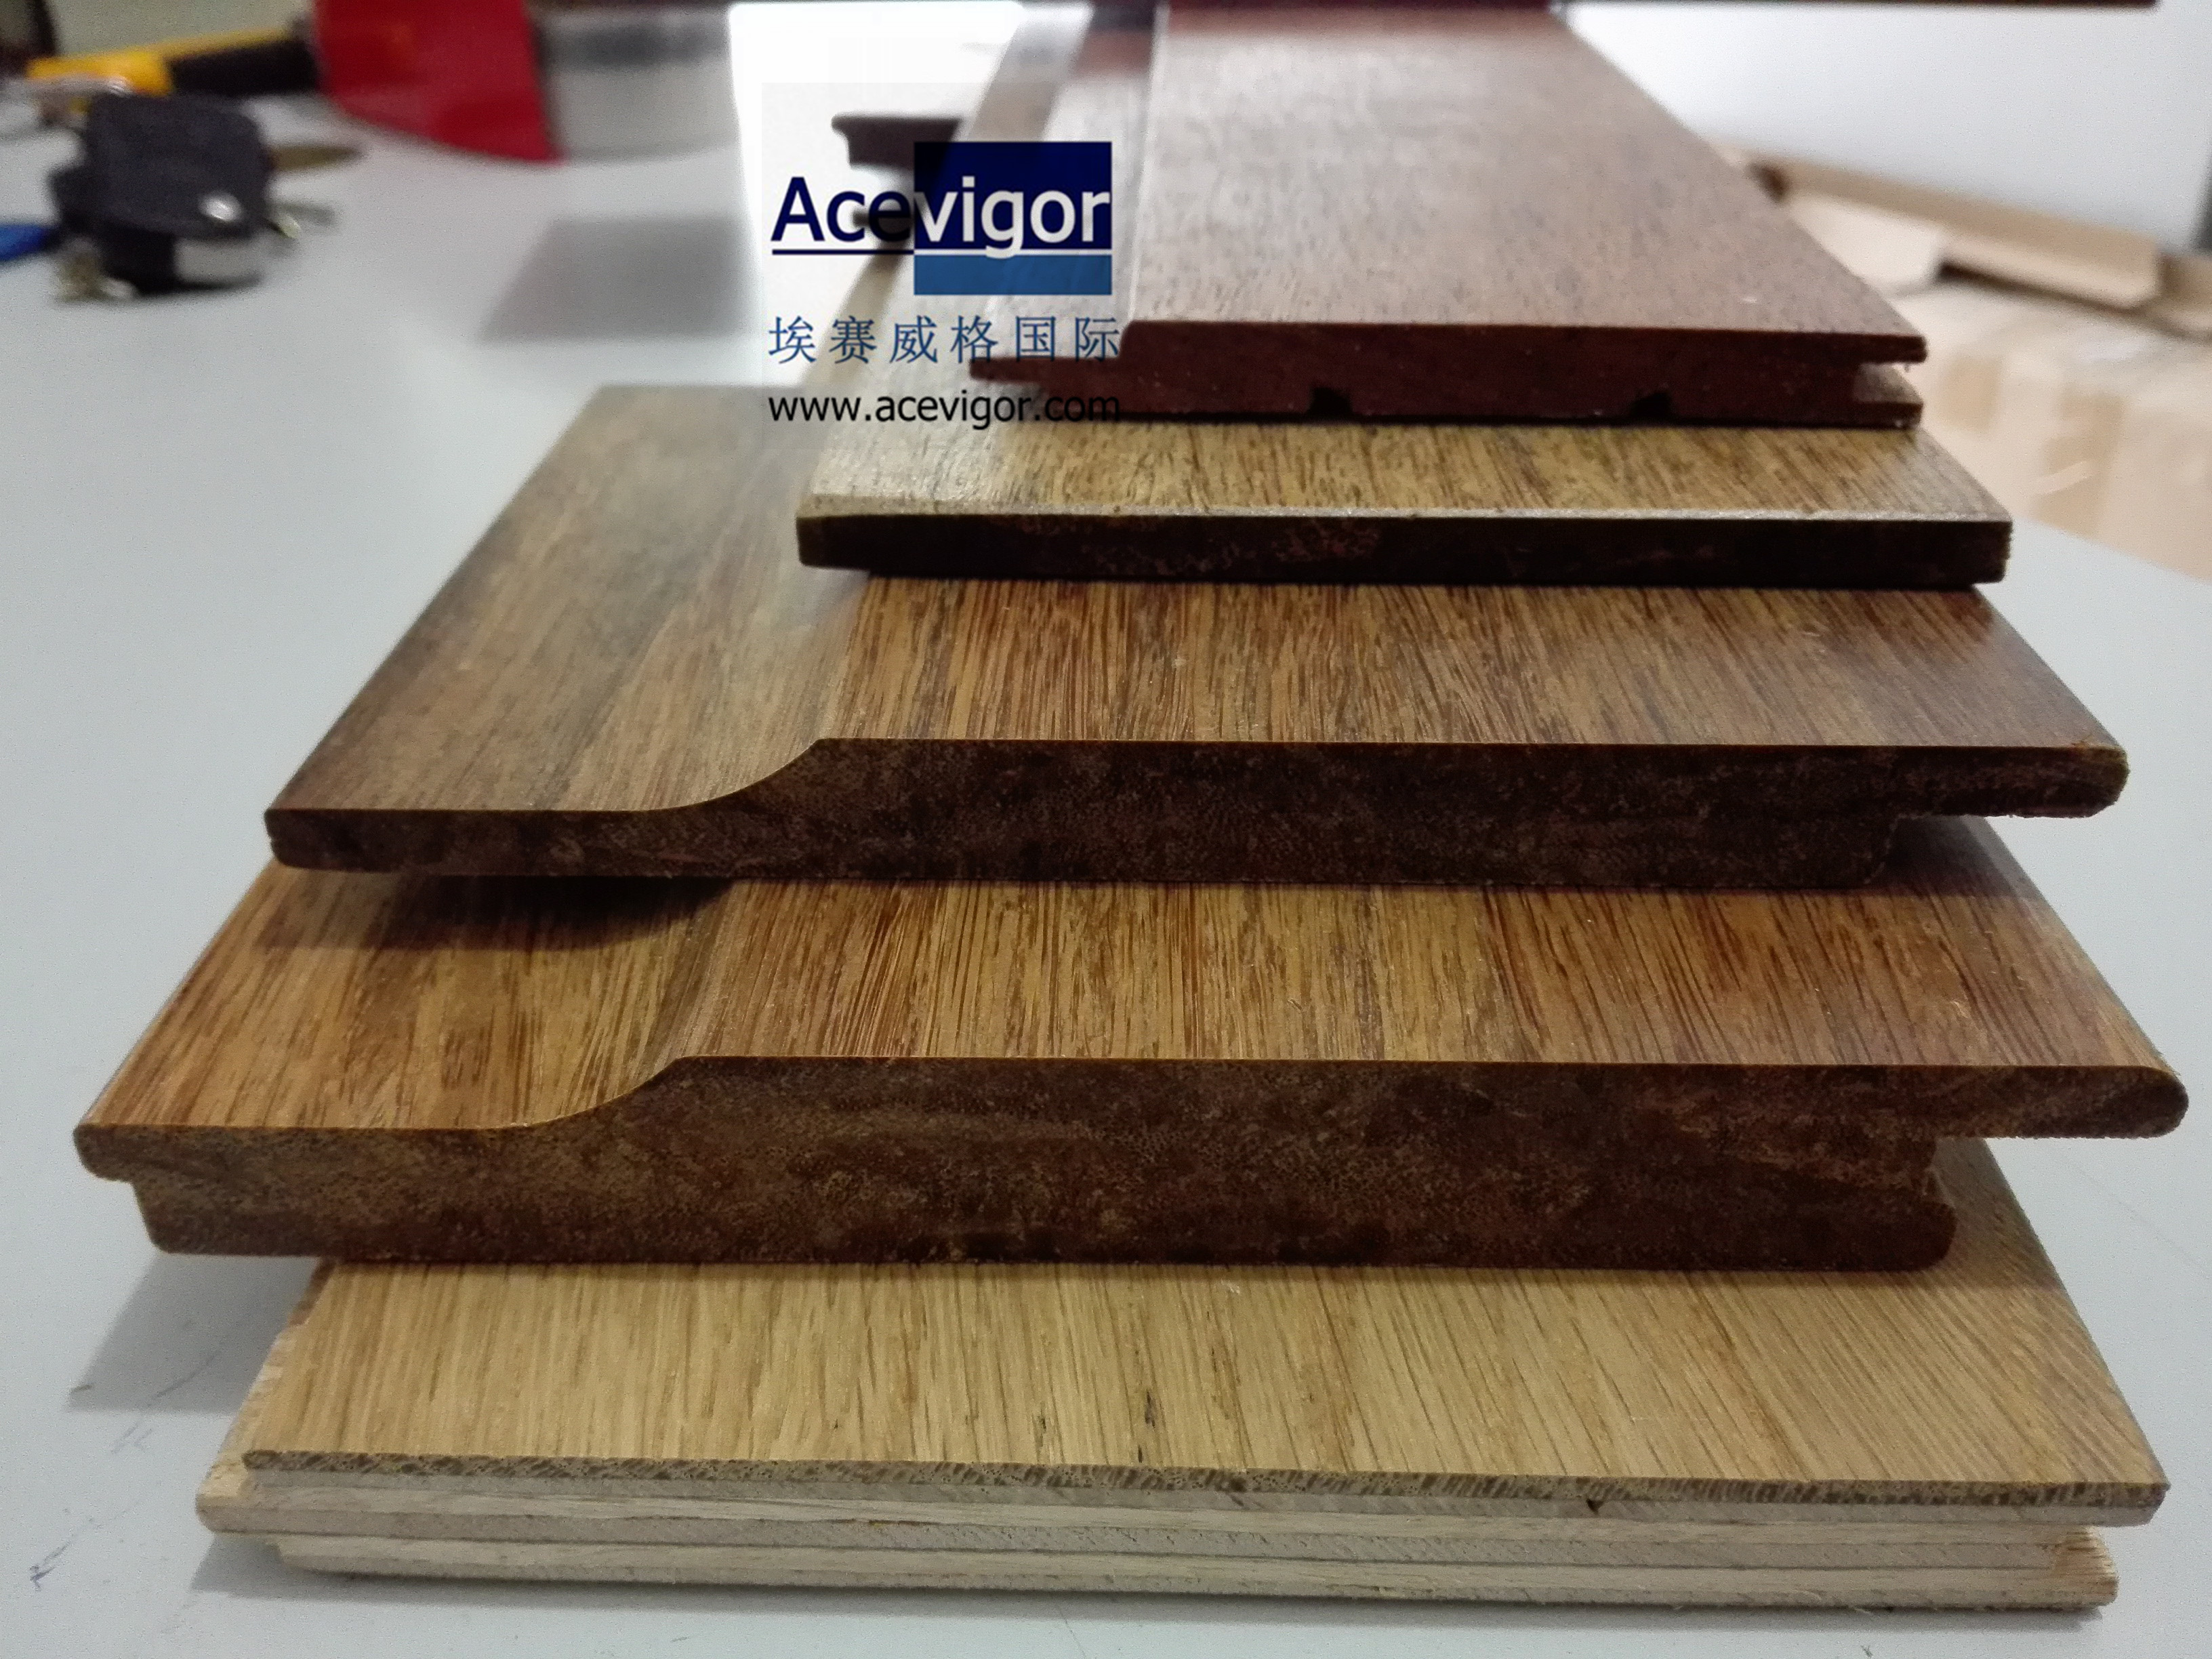  Good quality Wood Cladding, Bamboo cladding, wall panel, ceiling Manufactures